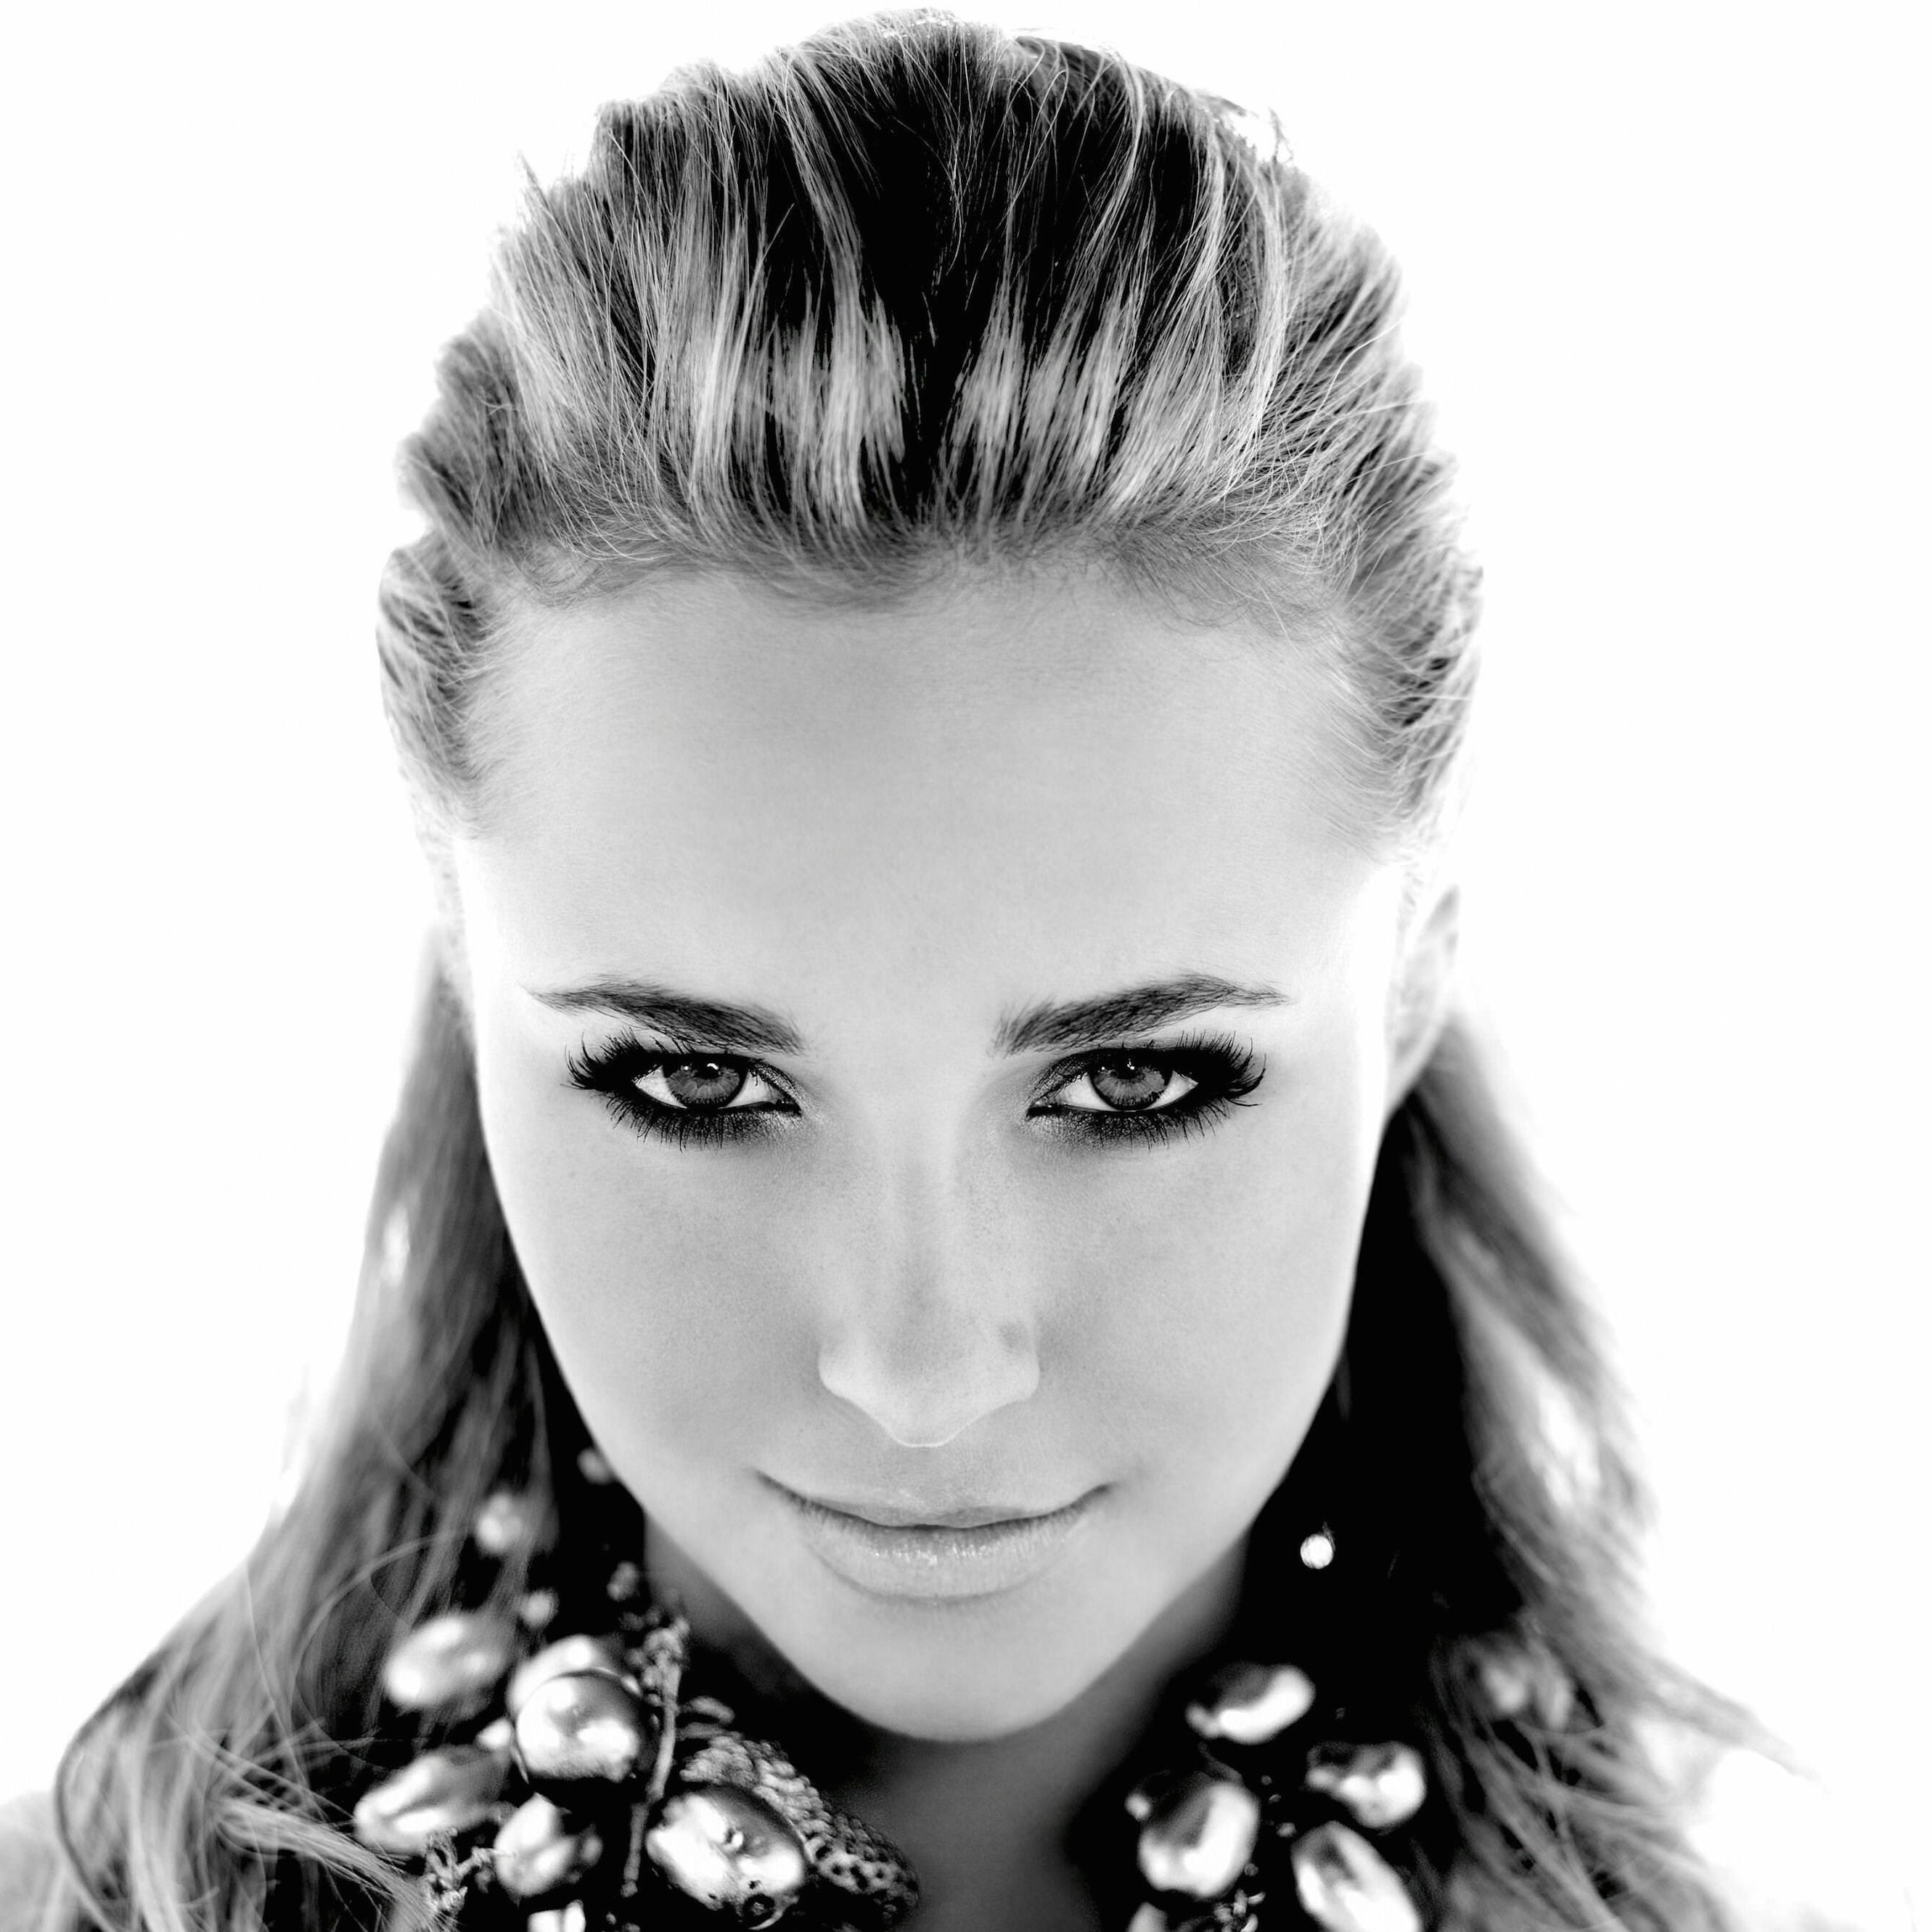 Hayden Panettiere In Black & White Wallpaper for Apple iPhone 6 Plus